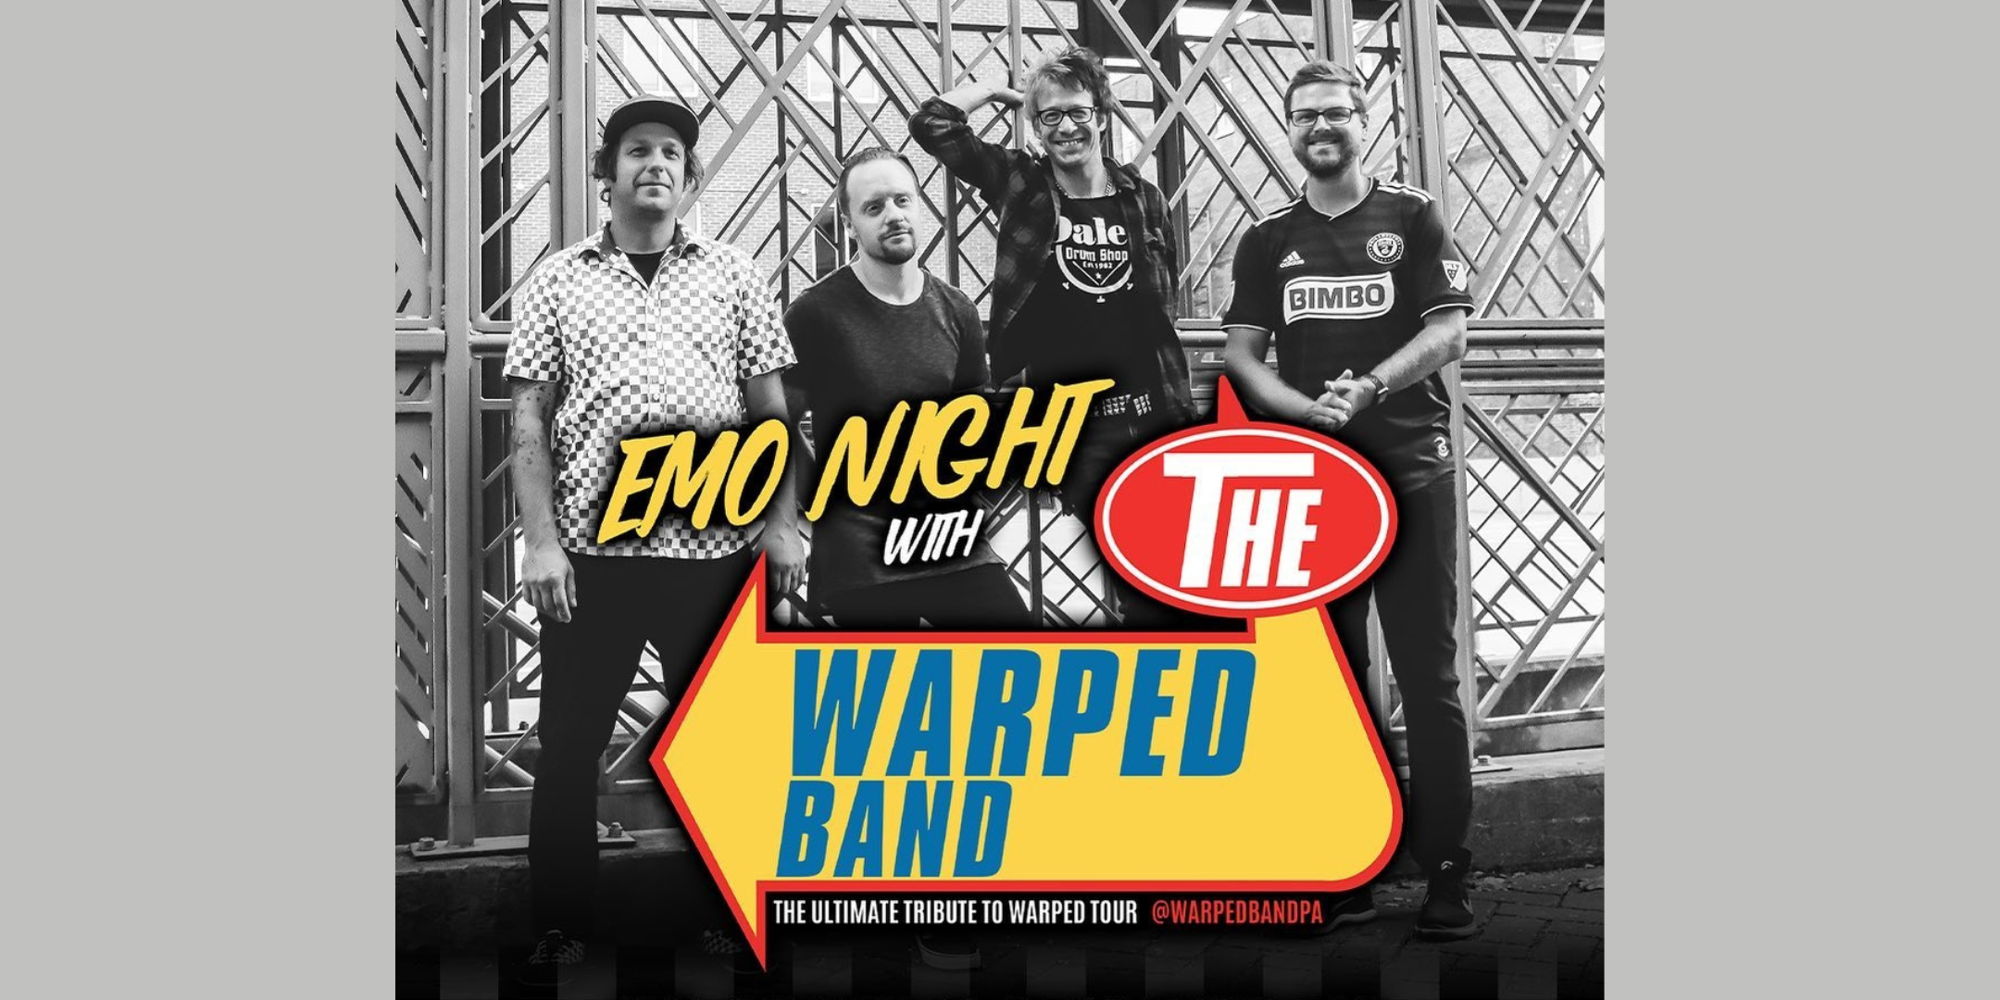 Emo Night w/ The Warped Band promotional image